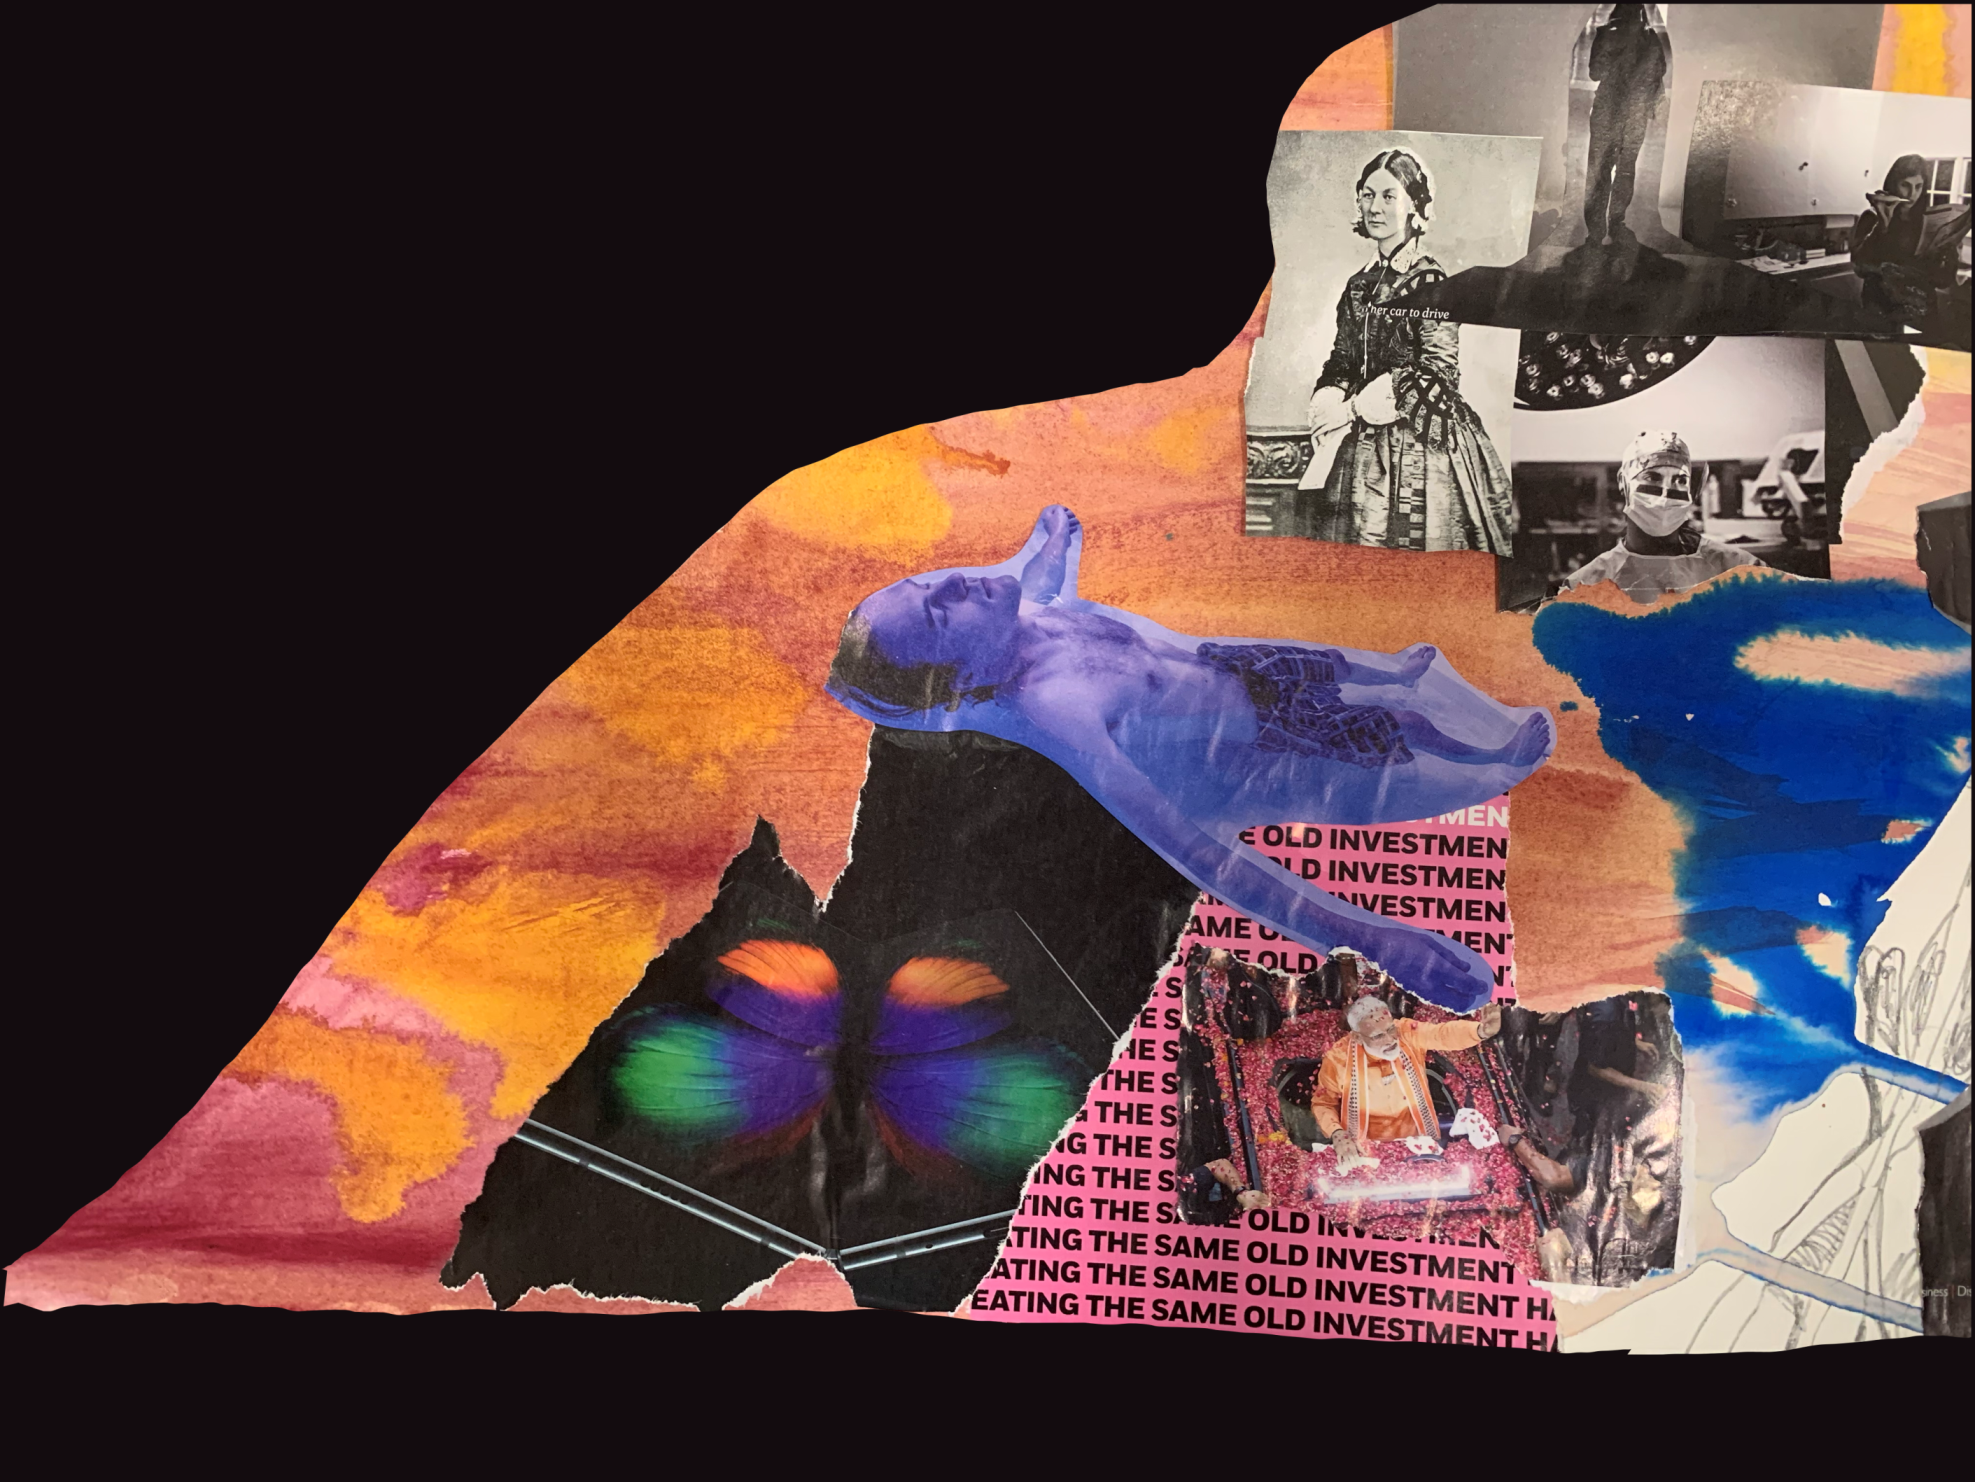 Black rectangular background, triangular figure within of pink, orange and yellow tones. Inside, there are scraps of blank and white and color photographs, most are of people: a Victorian lady, a young woman eating and reading in what seems to be a kitchen, a healthcare professional wearing a mask, a surgical scrub hat and gown, what seems to be a sculpture, a man floating in a pool (the color of that photograph is blue), a butterfly upside down, an Indian man playing cards surrounded by glitter. There is also a scrap of a black text repeating the sentence "eating the same old investment" in various successive lines, with a pink background